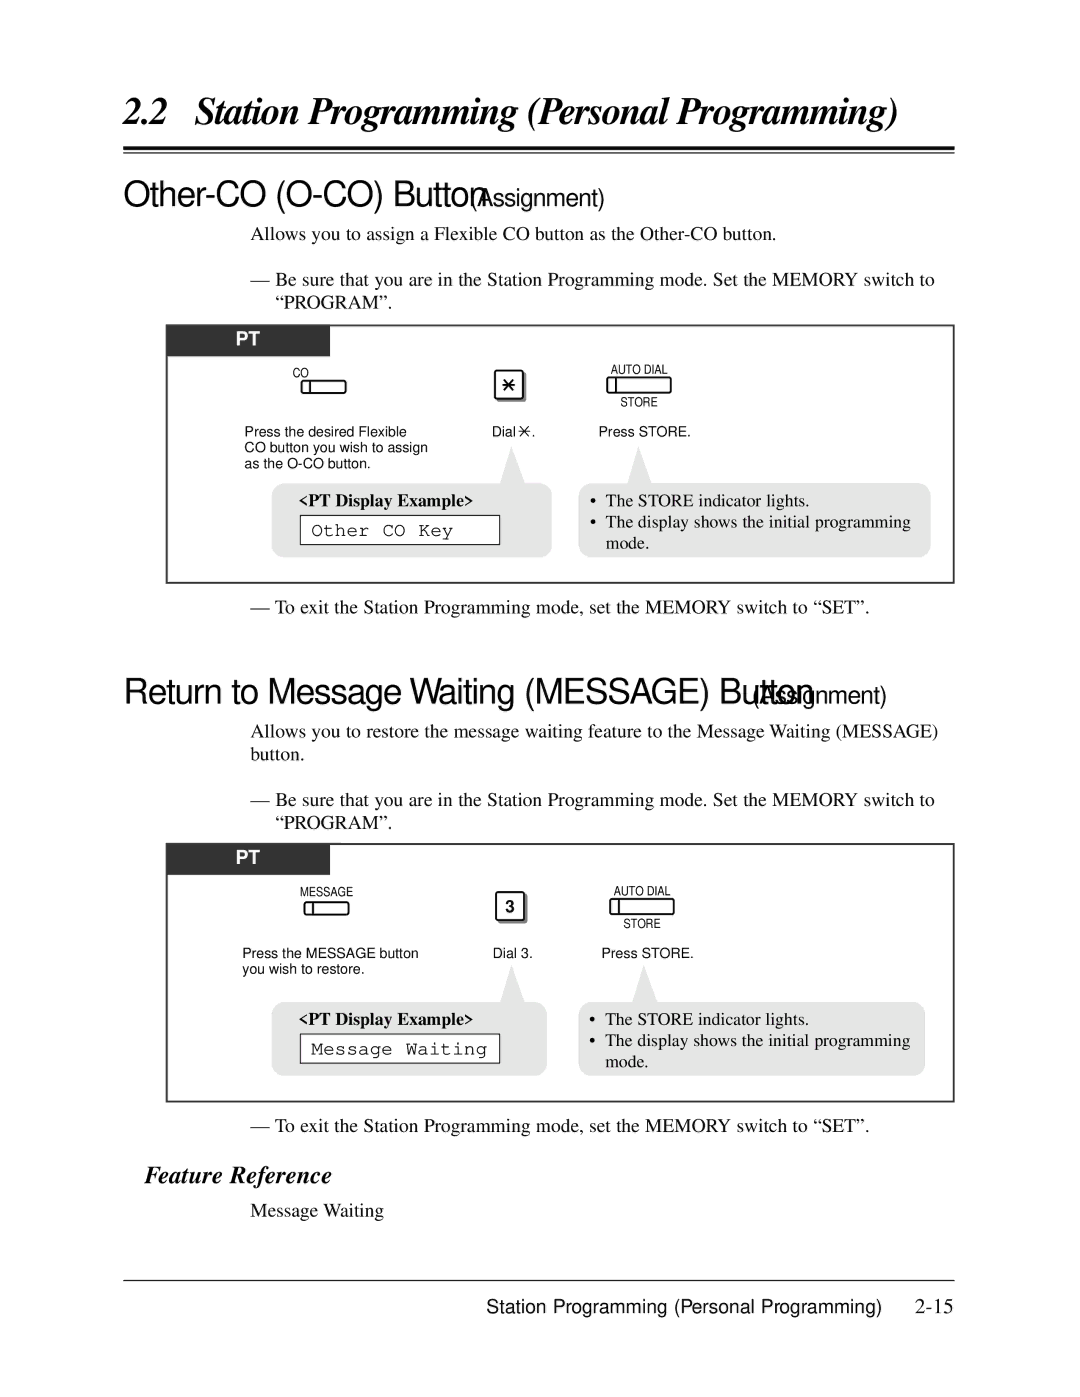 Panasonic KX-TA624 Other-CO O-CO Button Assignment, Return to Message Waiting Message Button Assignment, Other CO Key 